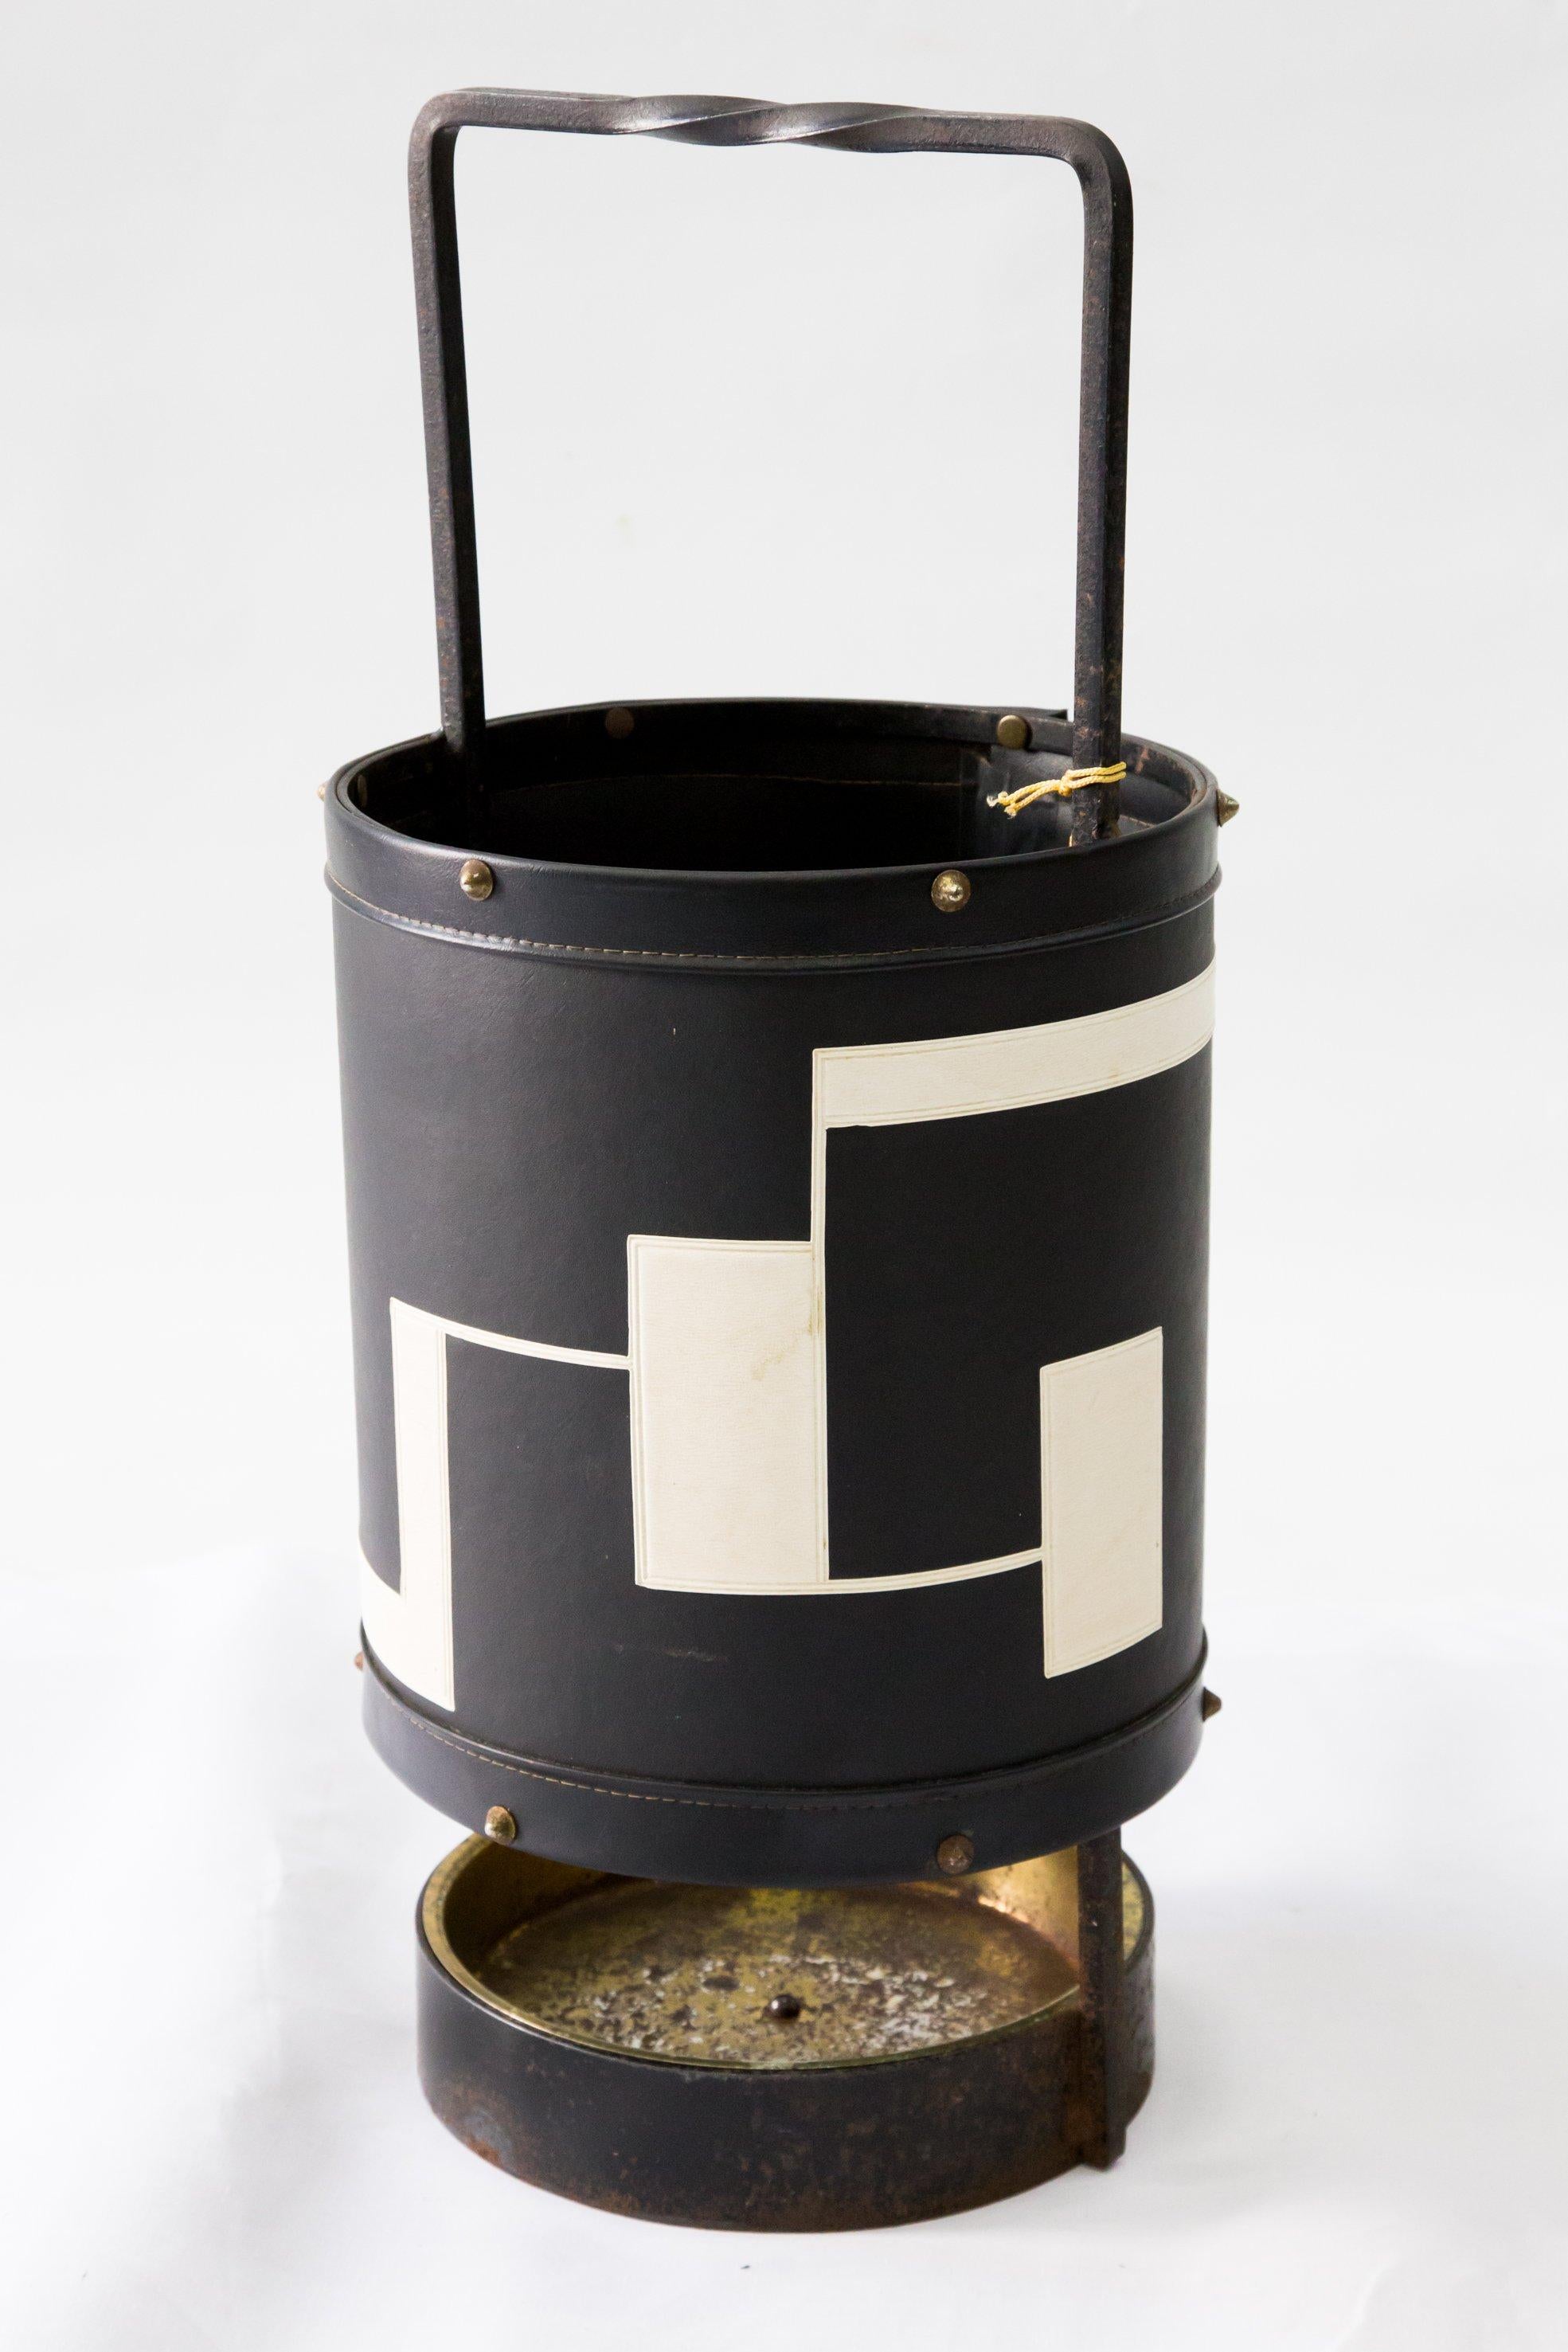 1950s-1960s era leatherette and iron umbrella stand in black and white color.
This vintage item remains fully functional, but it shows sign of age through scuffs, some rusting and fading of material.